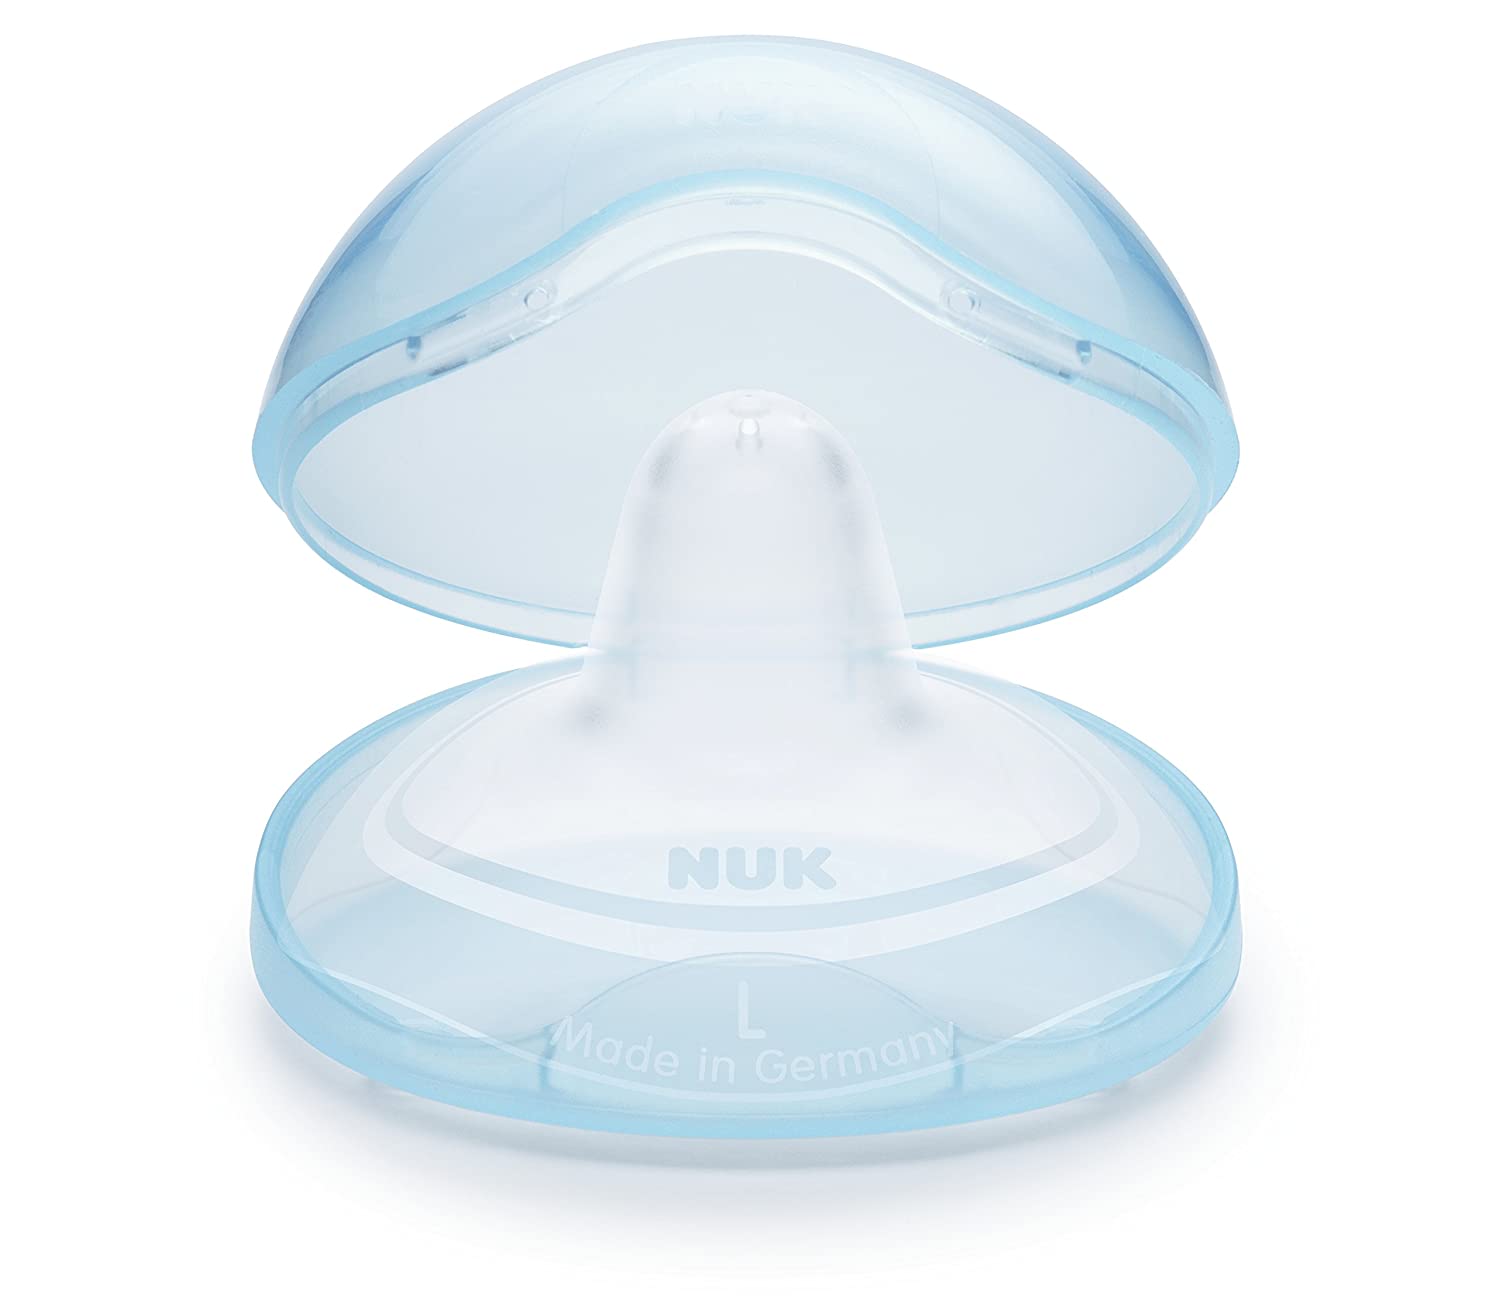 Nuk Nipple Protection for Sensitive Nipples with Protective Case, Transparent, Pack of 2